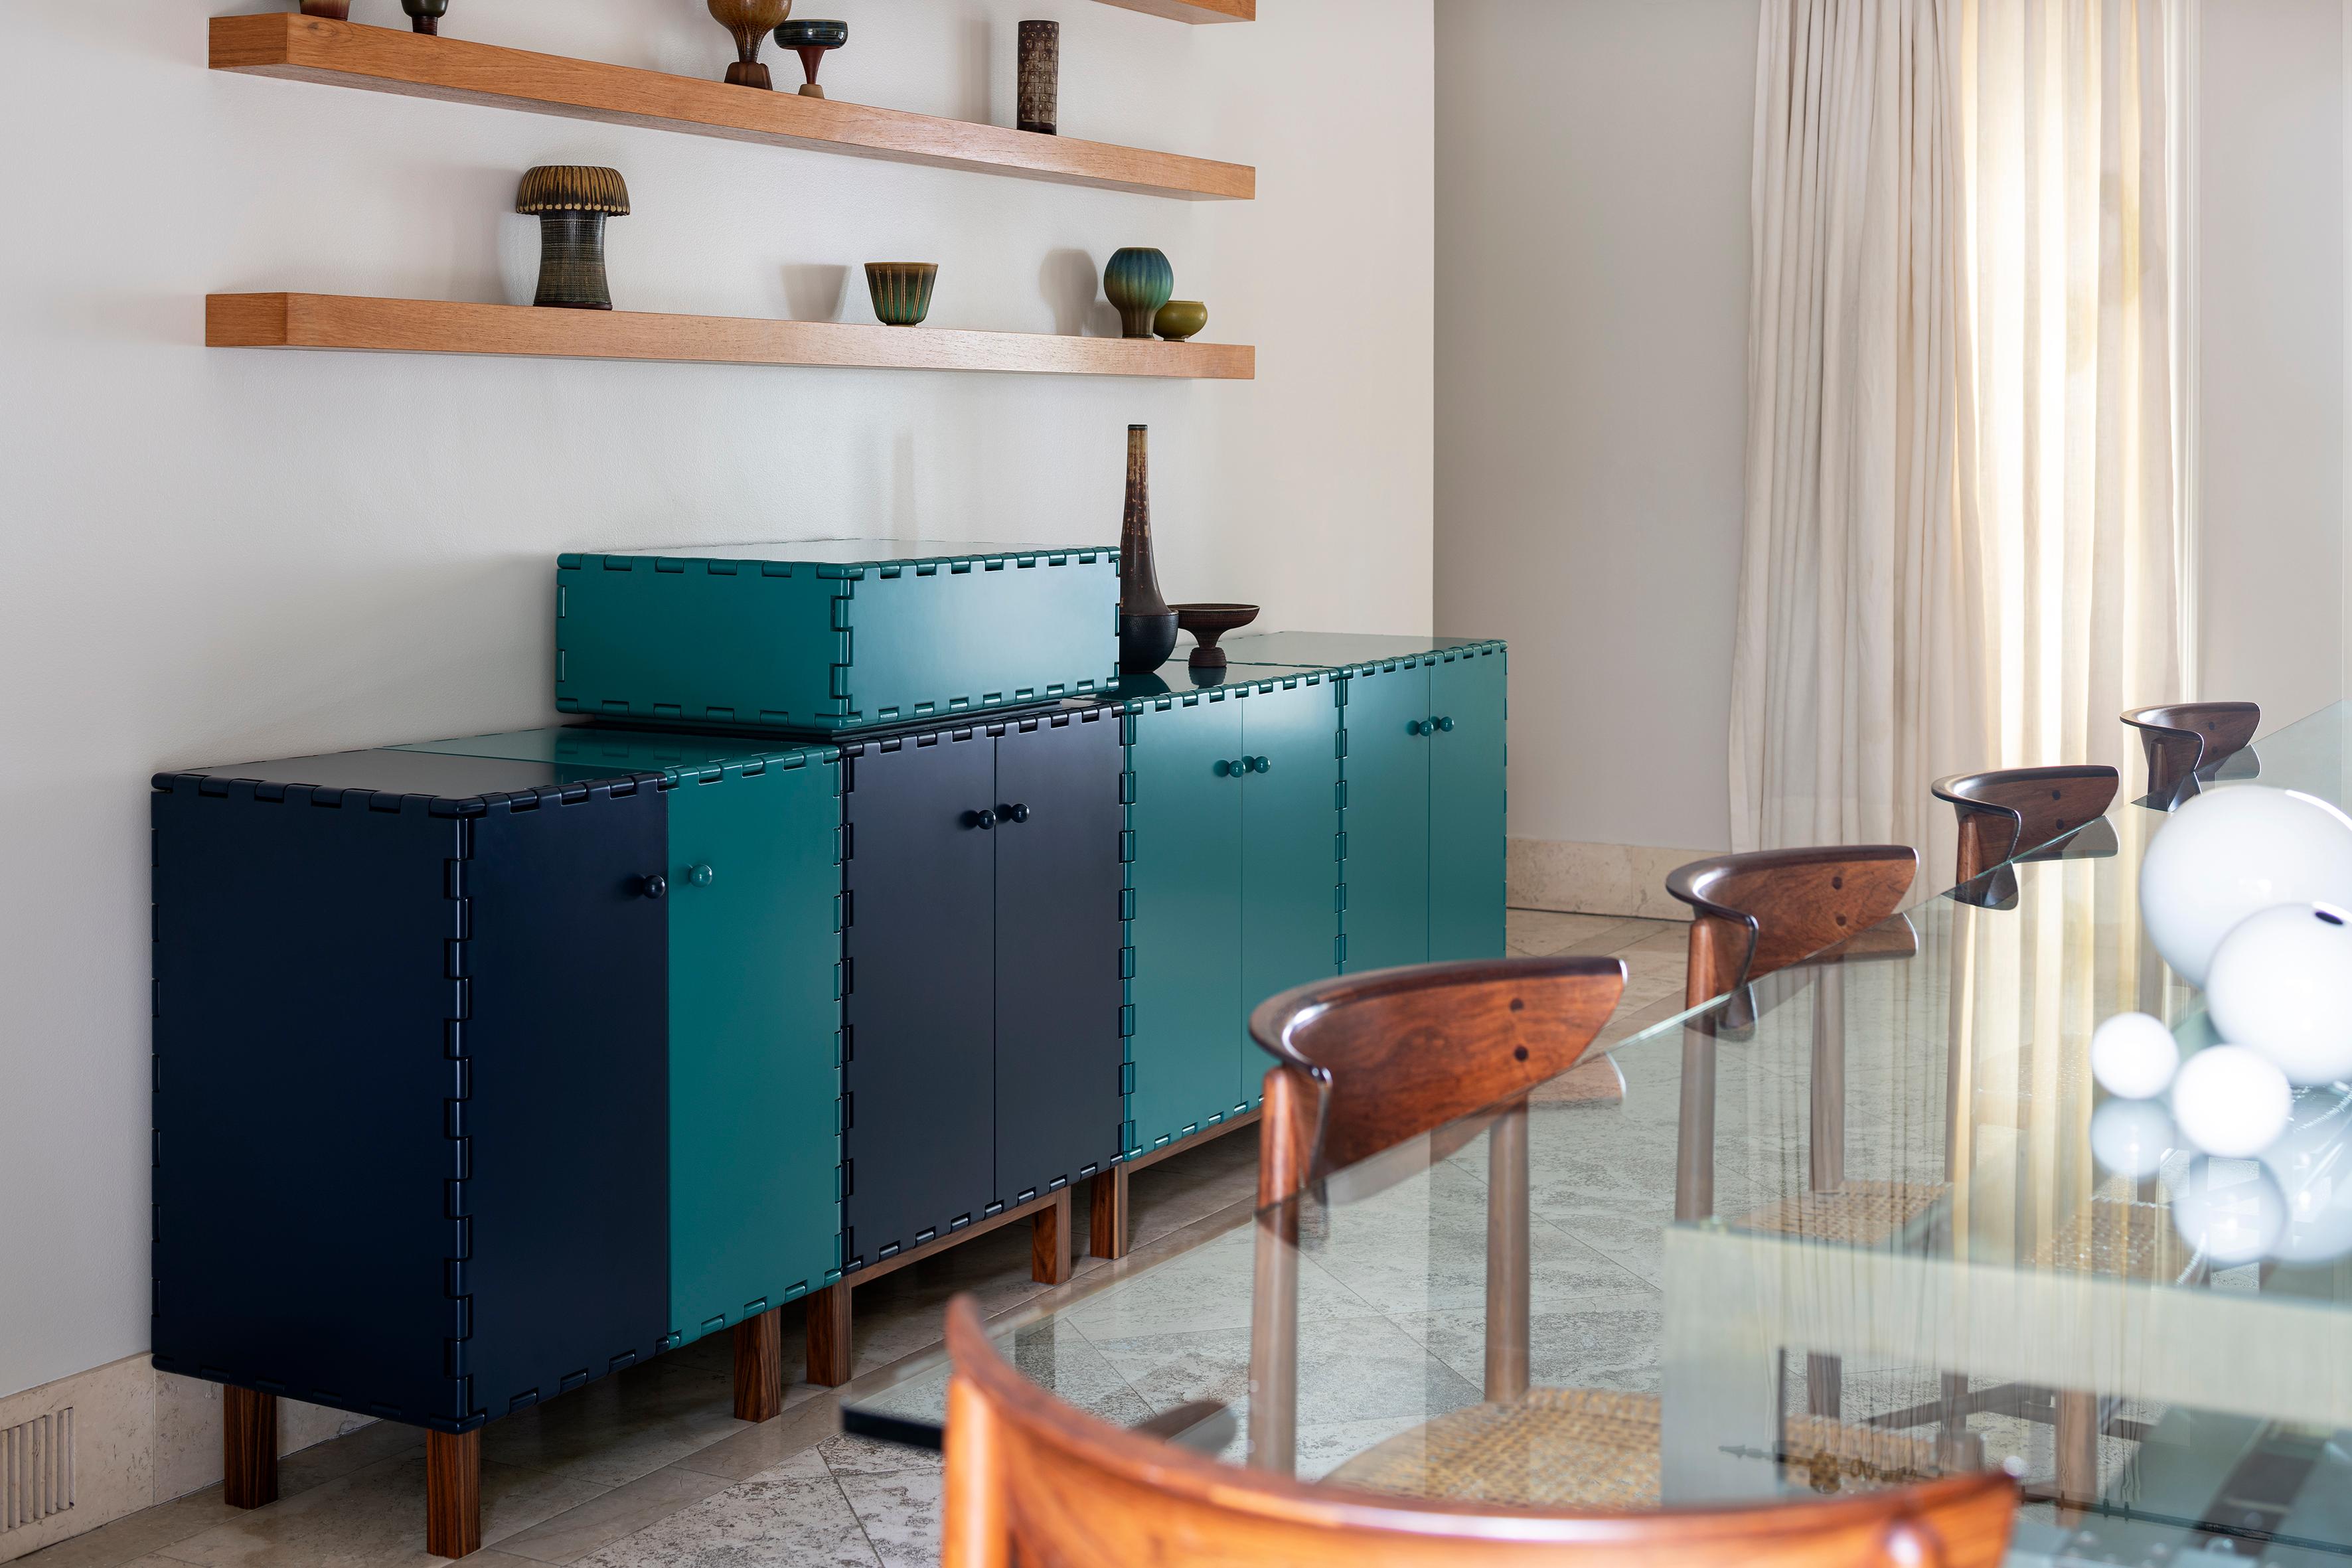 Handcrafted sideboard cabinet in lacquered wood. The lacquer color highlights the simplicity of the design details. The modular quality of the collection allow each cabinet to be combine with other pieces within the collection to create different